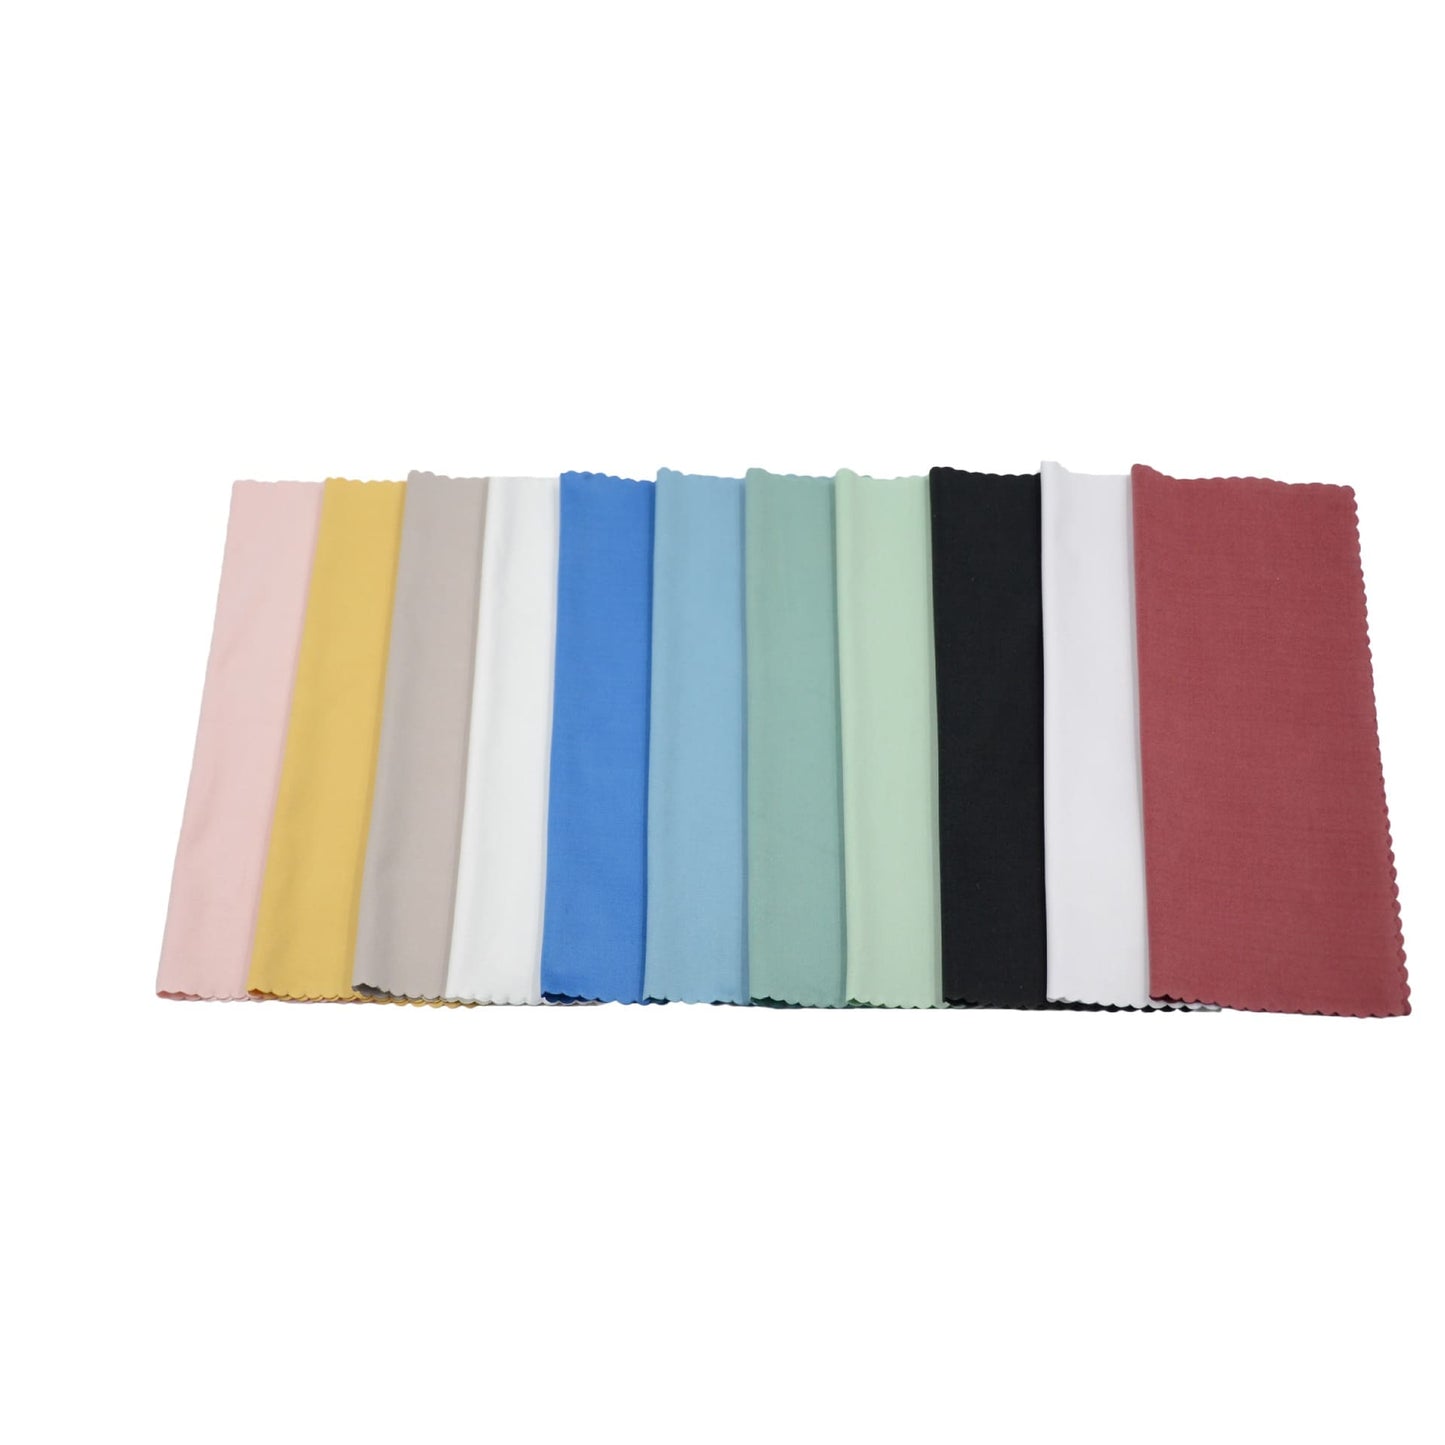 11 colors of watch jewelry suede cleaning cloth product Image